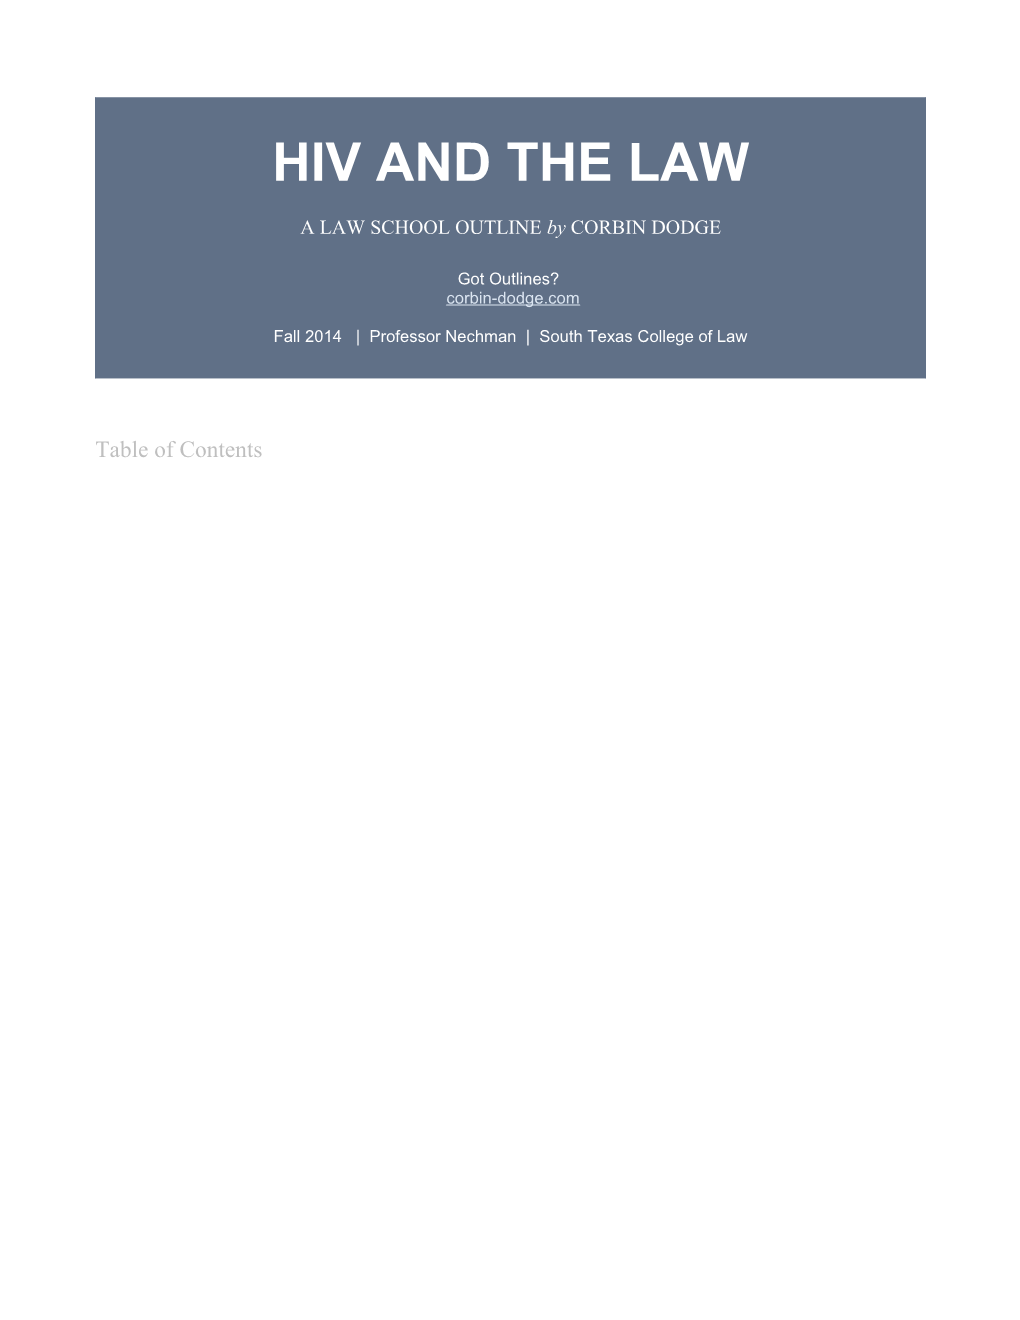 HIV and the Law